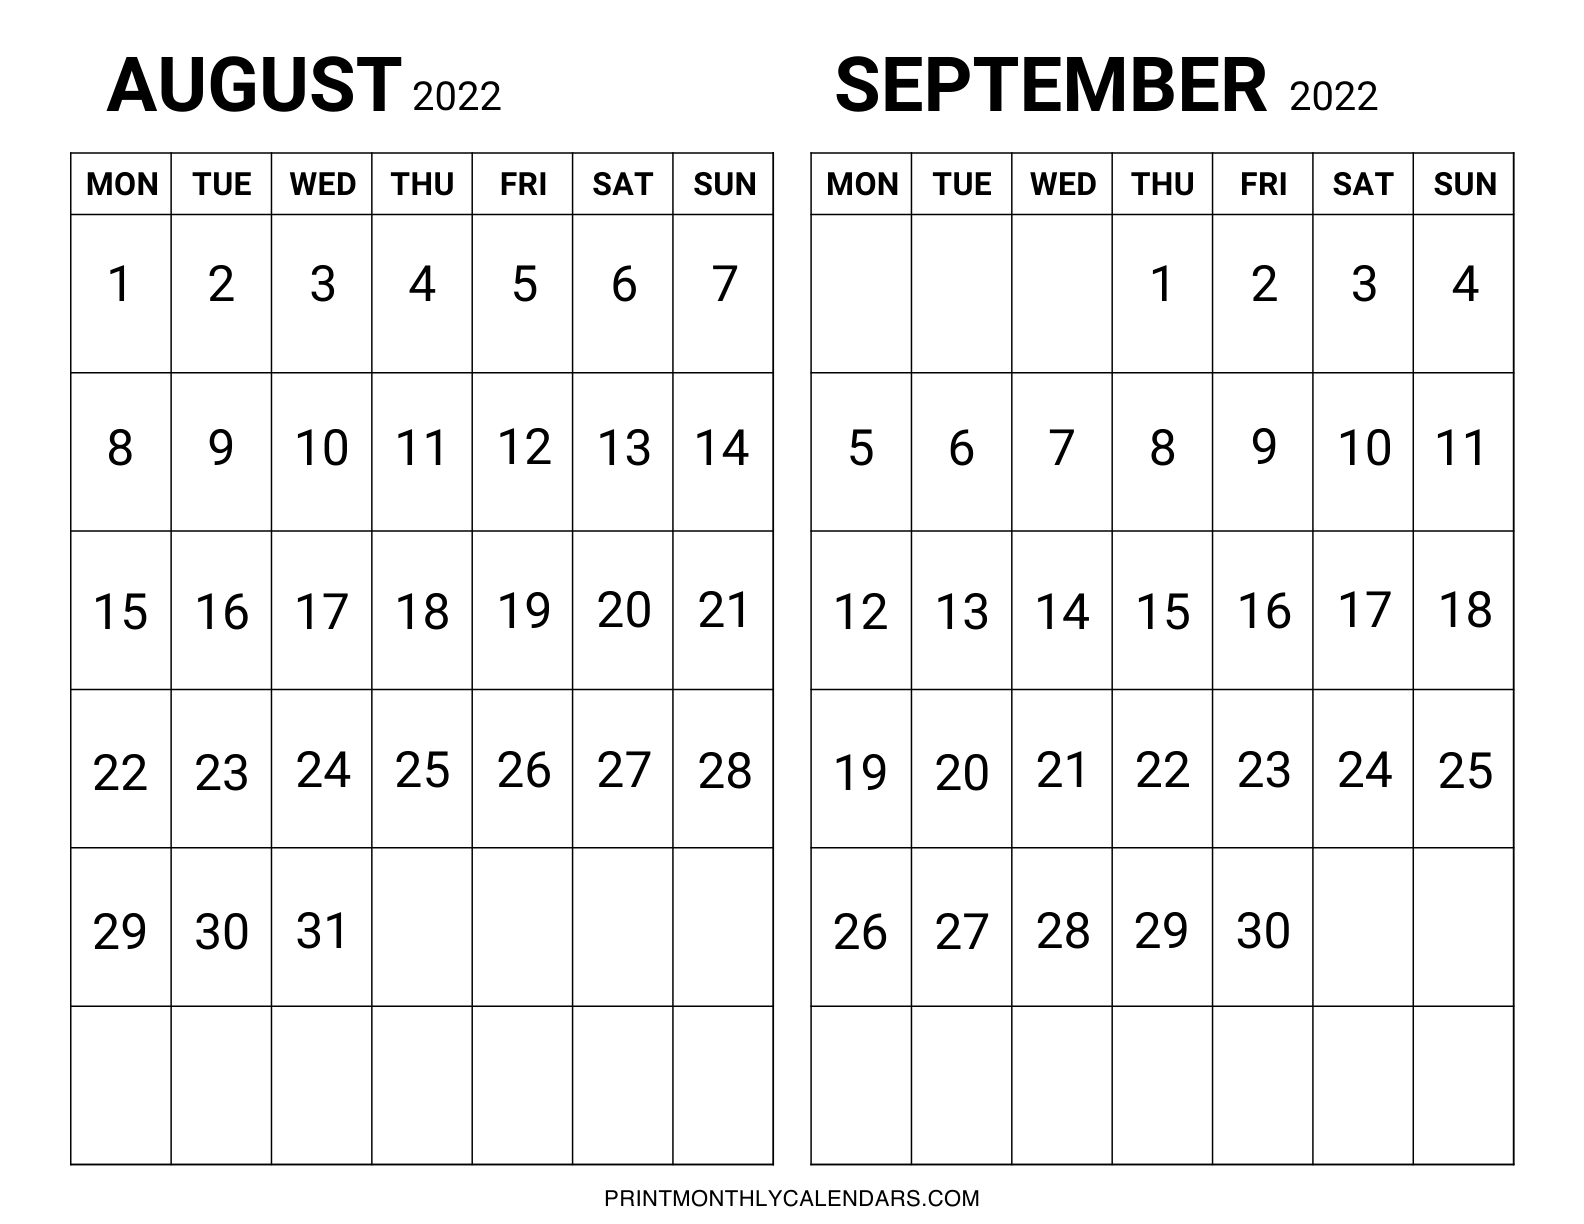 Calendar grids are arranged in a landscape layout with month headings at the top of the two-month August and September 2022 calendar design. Weekdays begin on Monday rather than Sunday, and the one-page calendar design includes bold monthly dates.